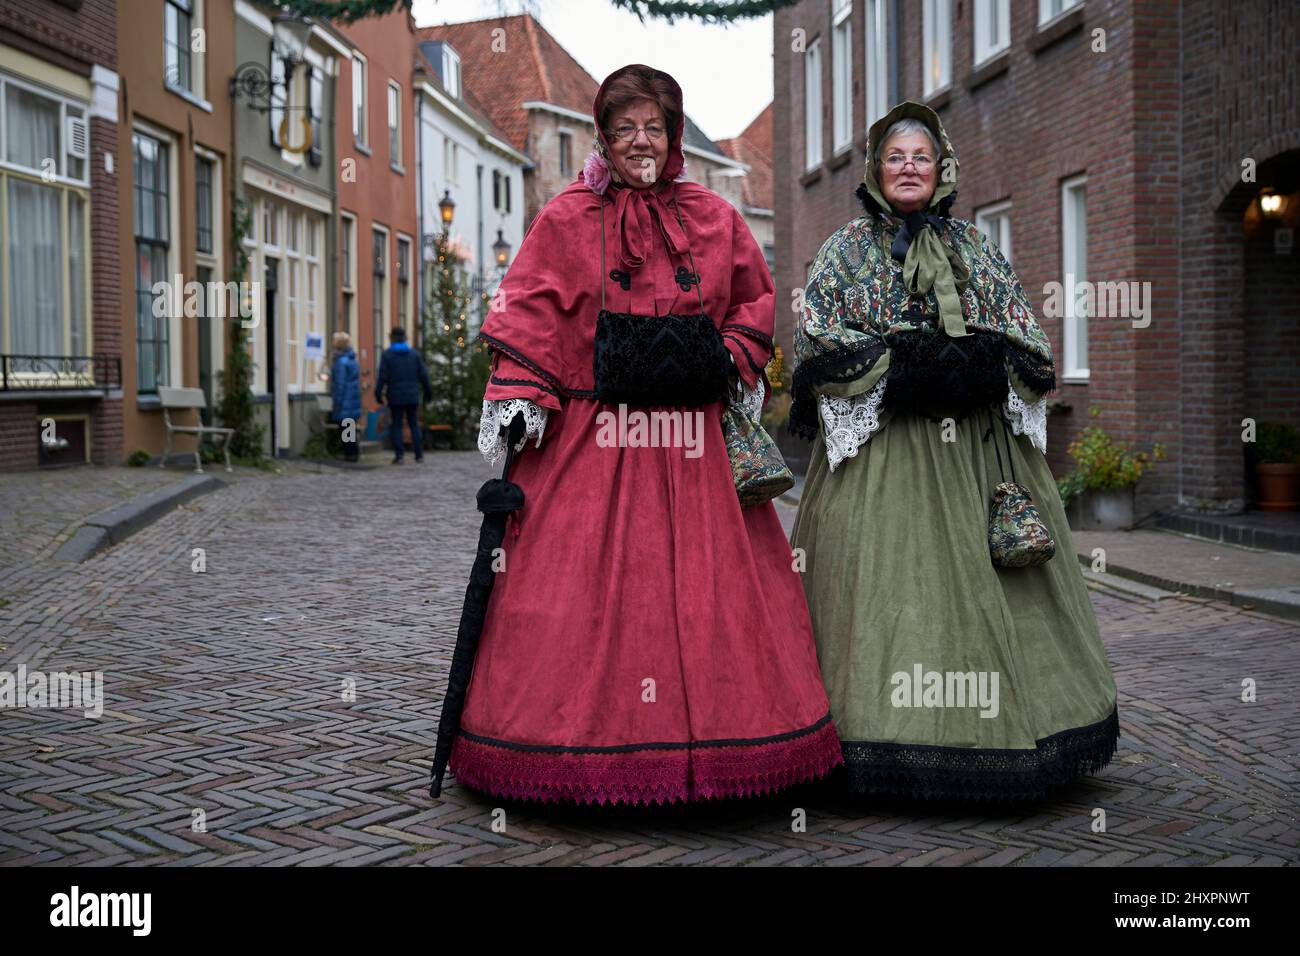 Two ladies stroll through the streets of Deventer dressed in period costume Stock Photo